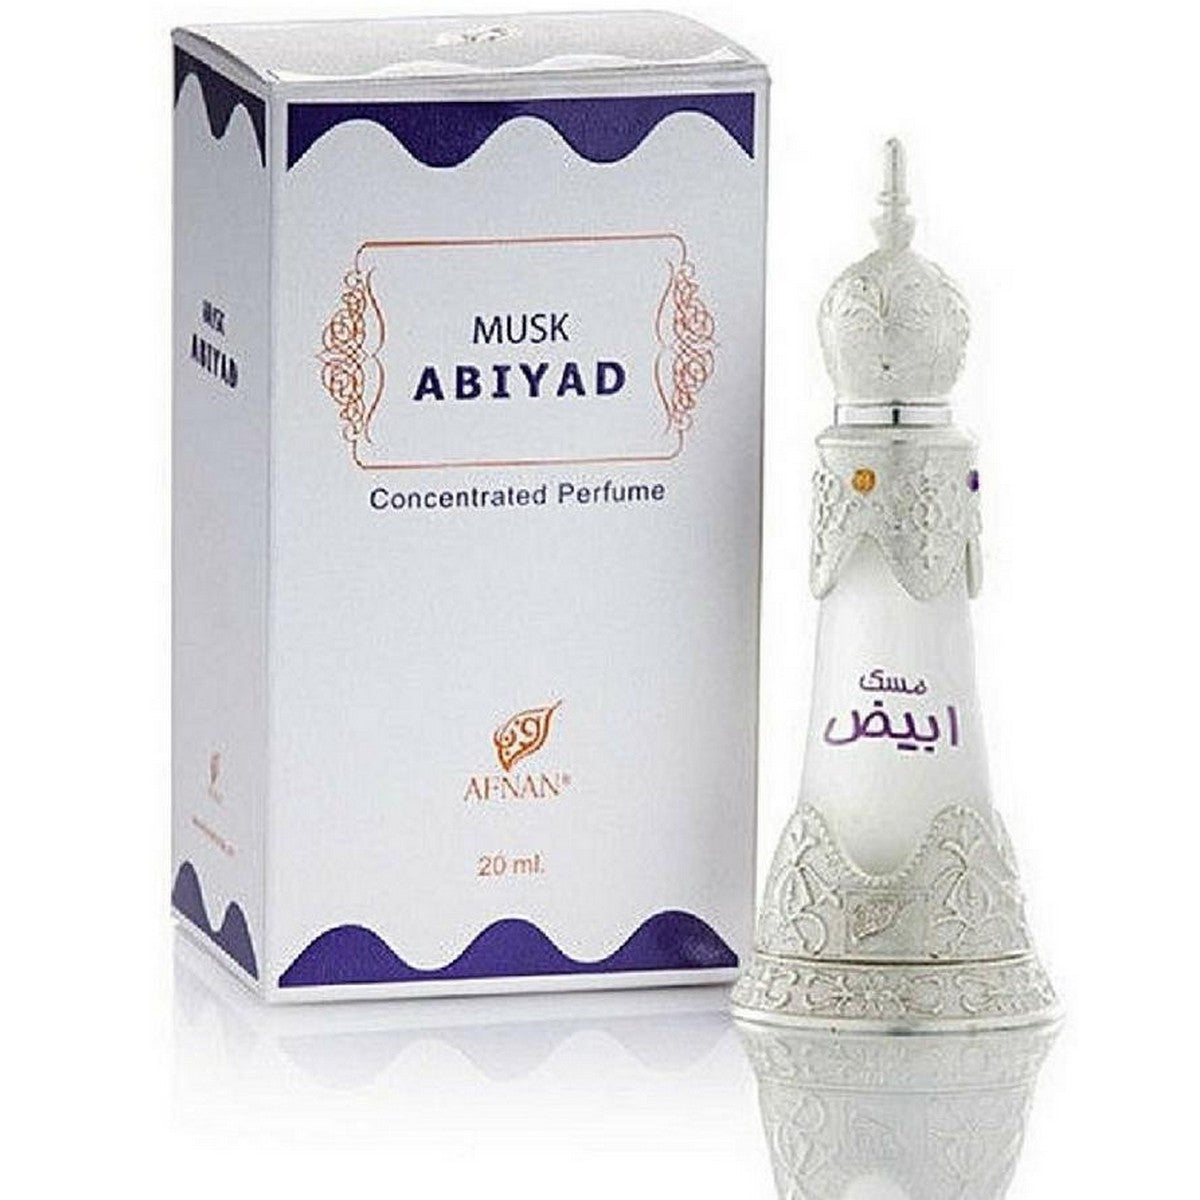 Afnan Abiyad Musk | .67 fl oz | 20 ML | Concentrated perfume oil | Alcohol free | FREE SHIPPING